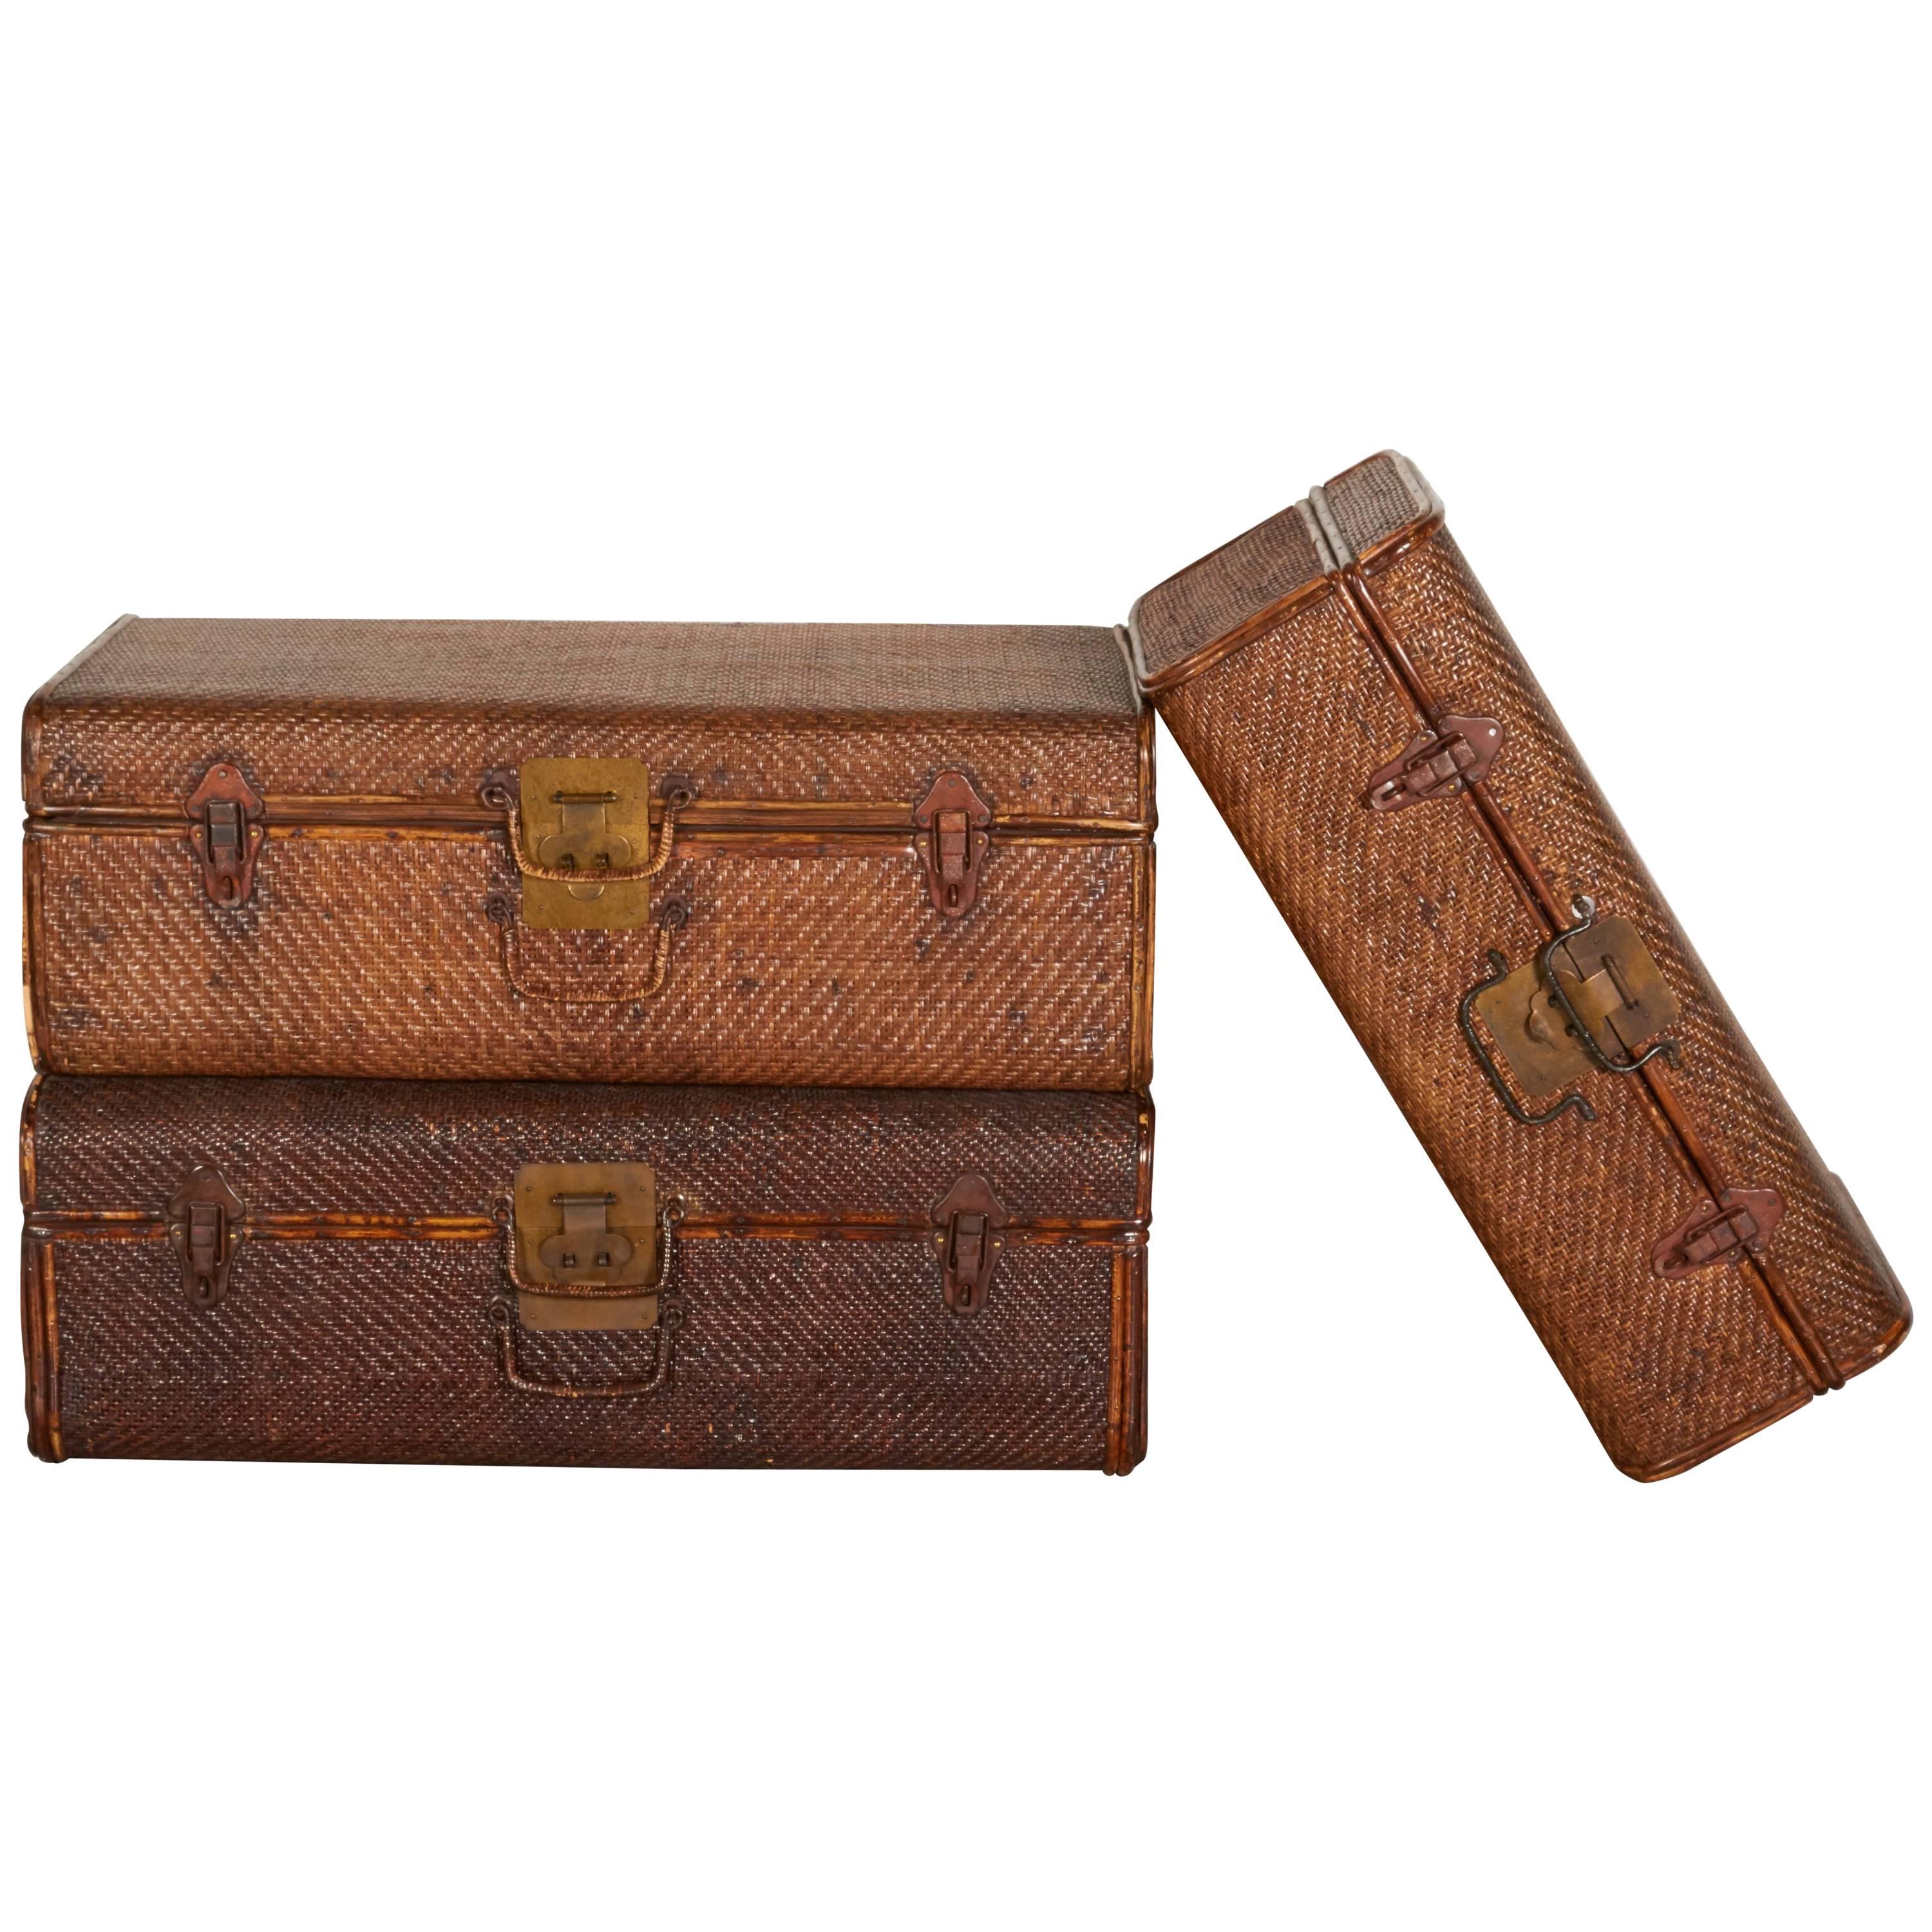 Collection of Handmade Rattan Suitcases with Perfectly Finished Wooden Interiors